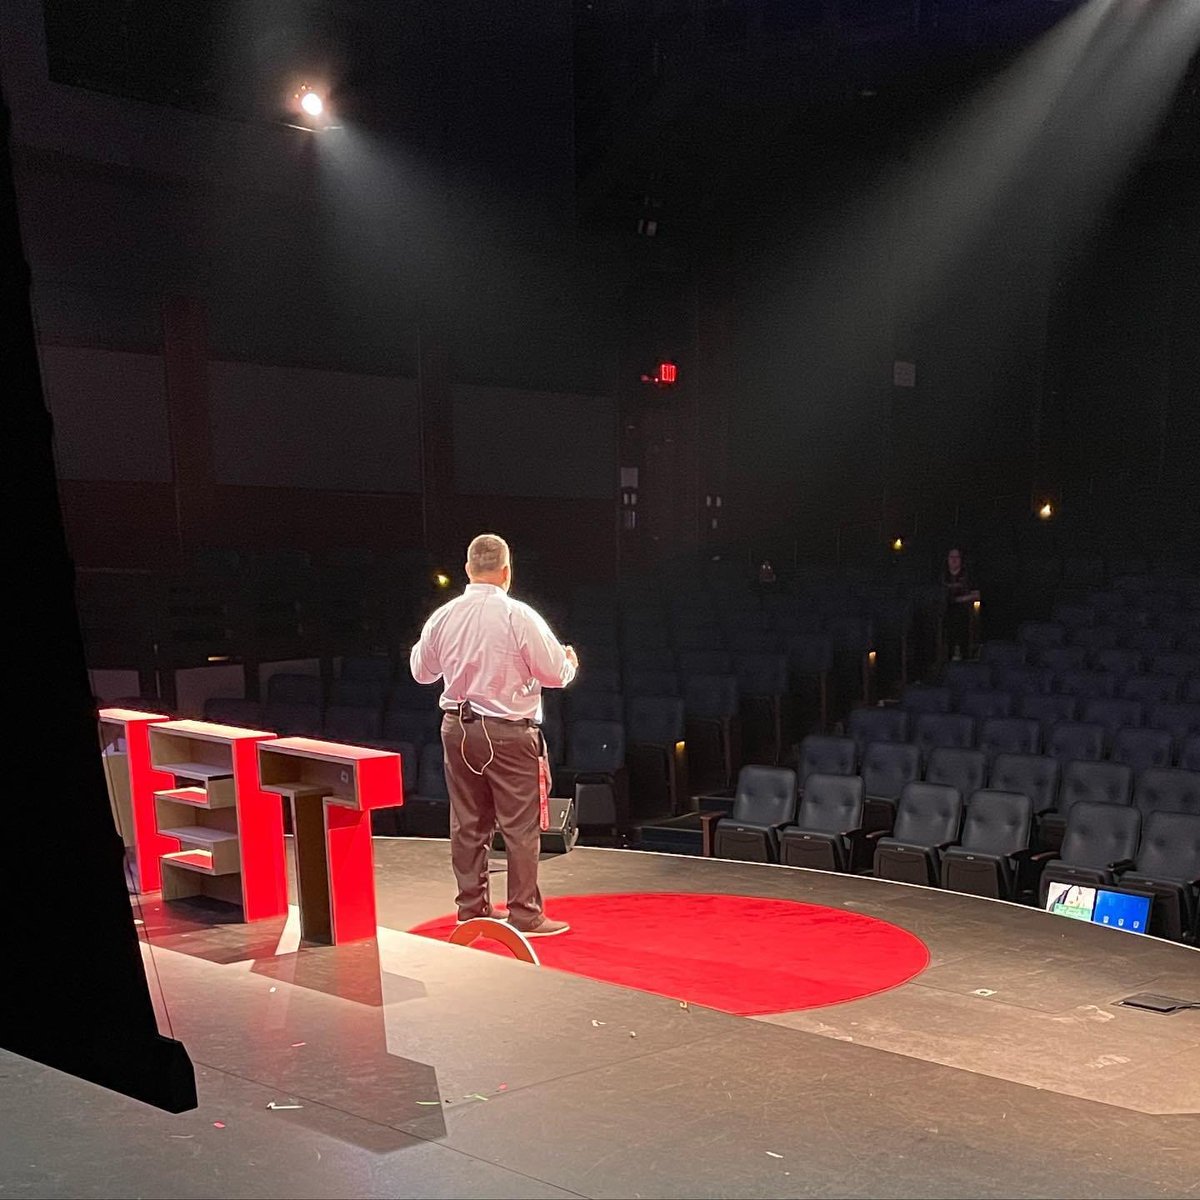 Long time Goshen resident Nick Pantaleone is going to share a talk that may surprise you. It’s not about being a principal (his current role), but more about the principles that help guide us well through life. It’s bound to inspire you. #tedxgoshen